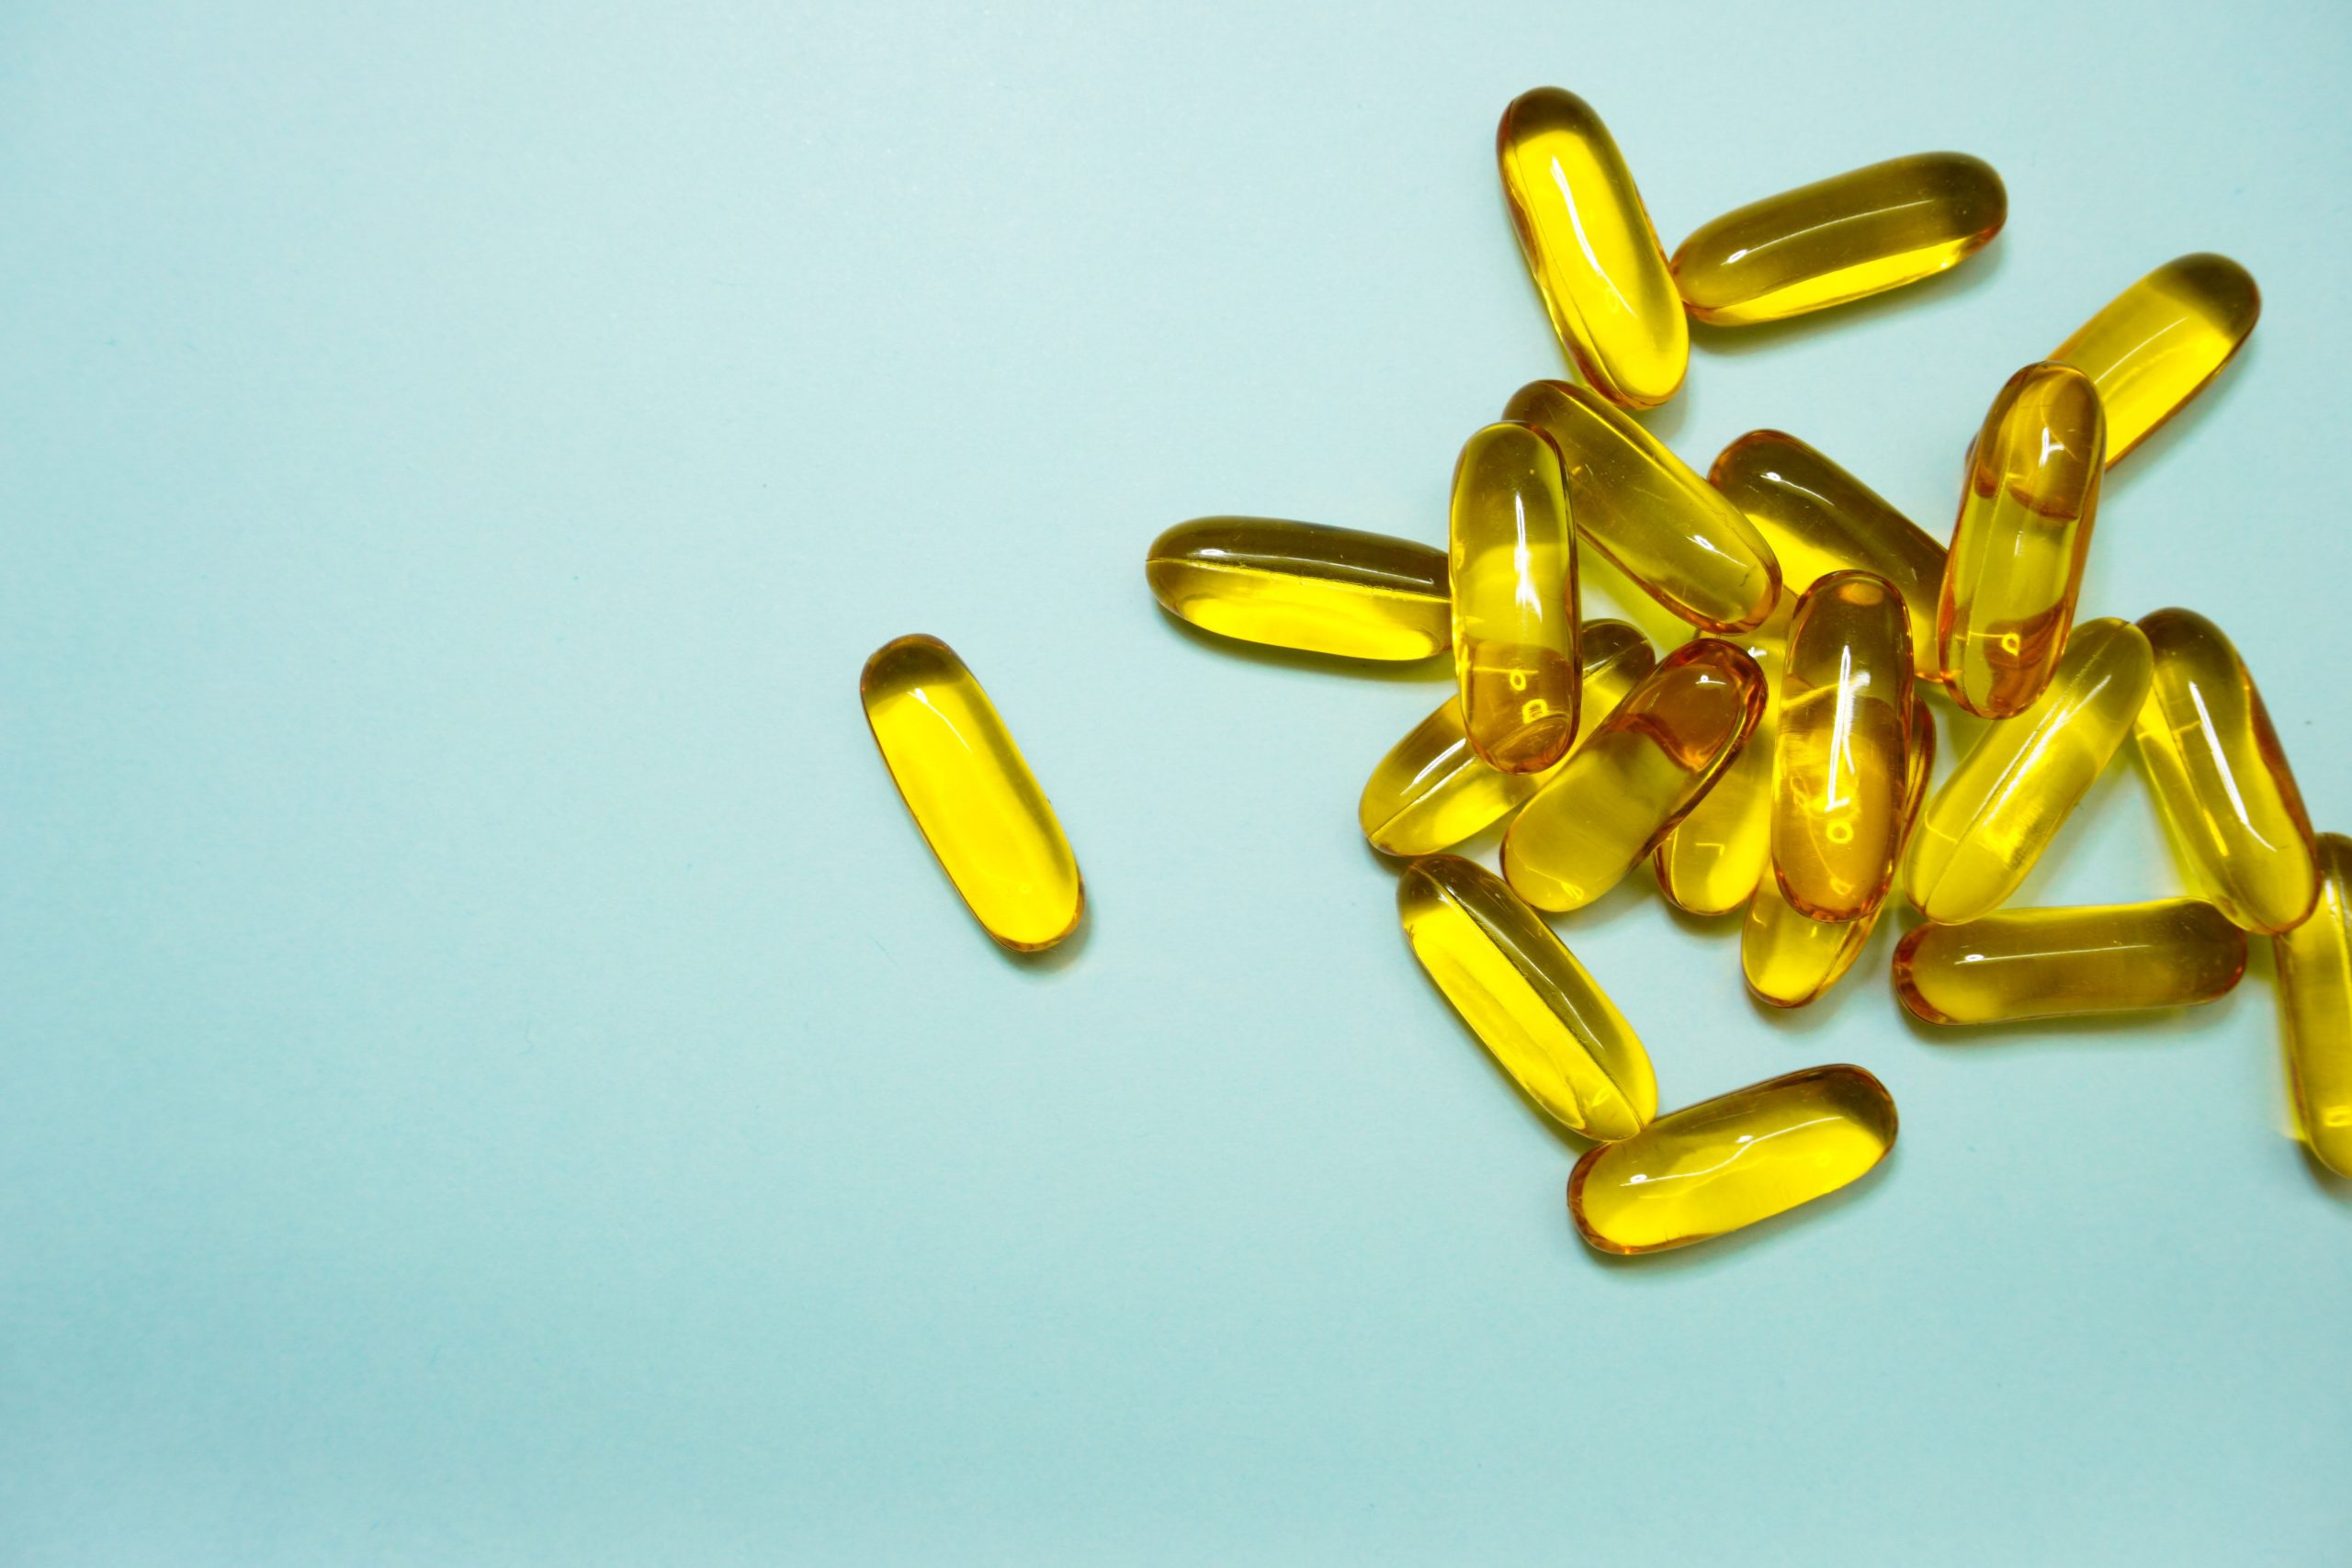 Vitamin D deficiency may be linked to deaths among COVID-19 patients: Study